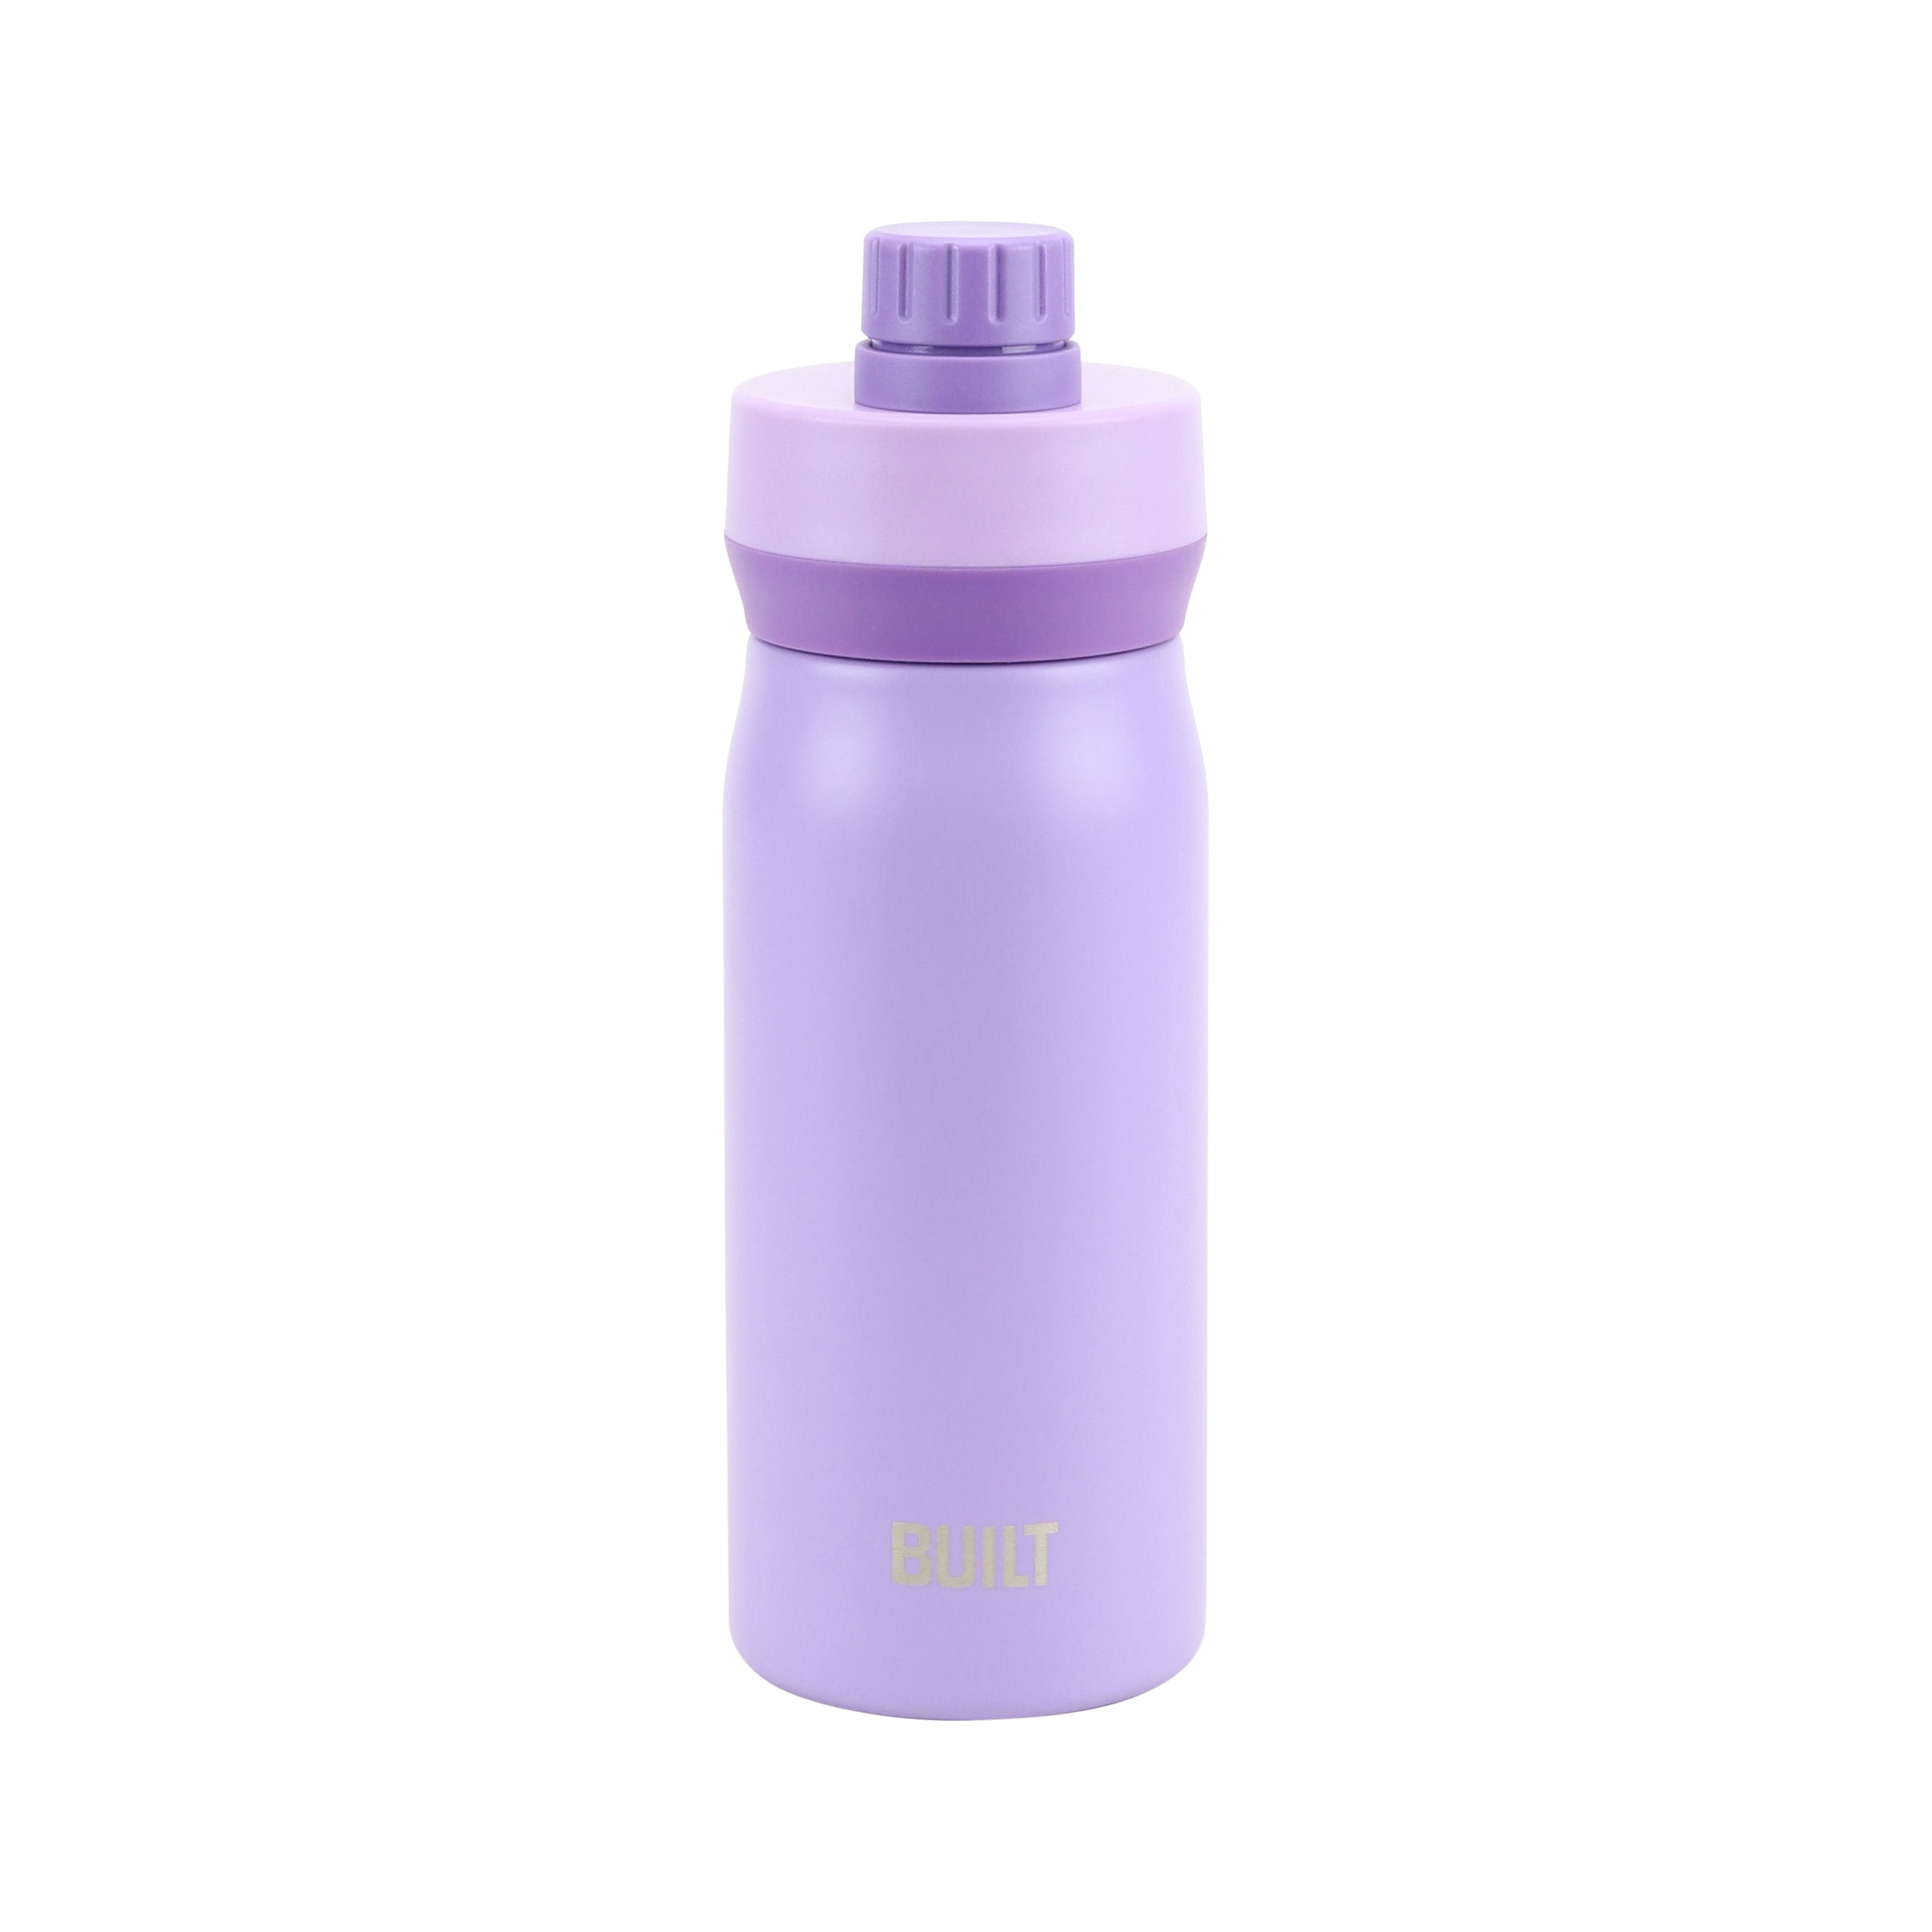 Built 16-Ounce Cascade Stainless Steel Water Bottle with Leakproof Chug Lid, 16 fl oz, Mint